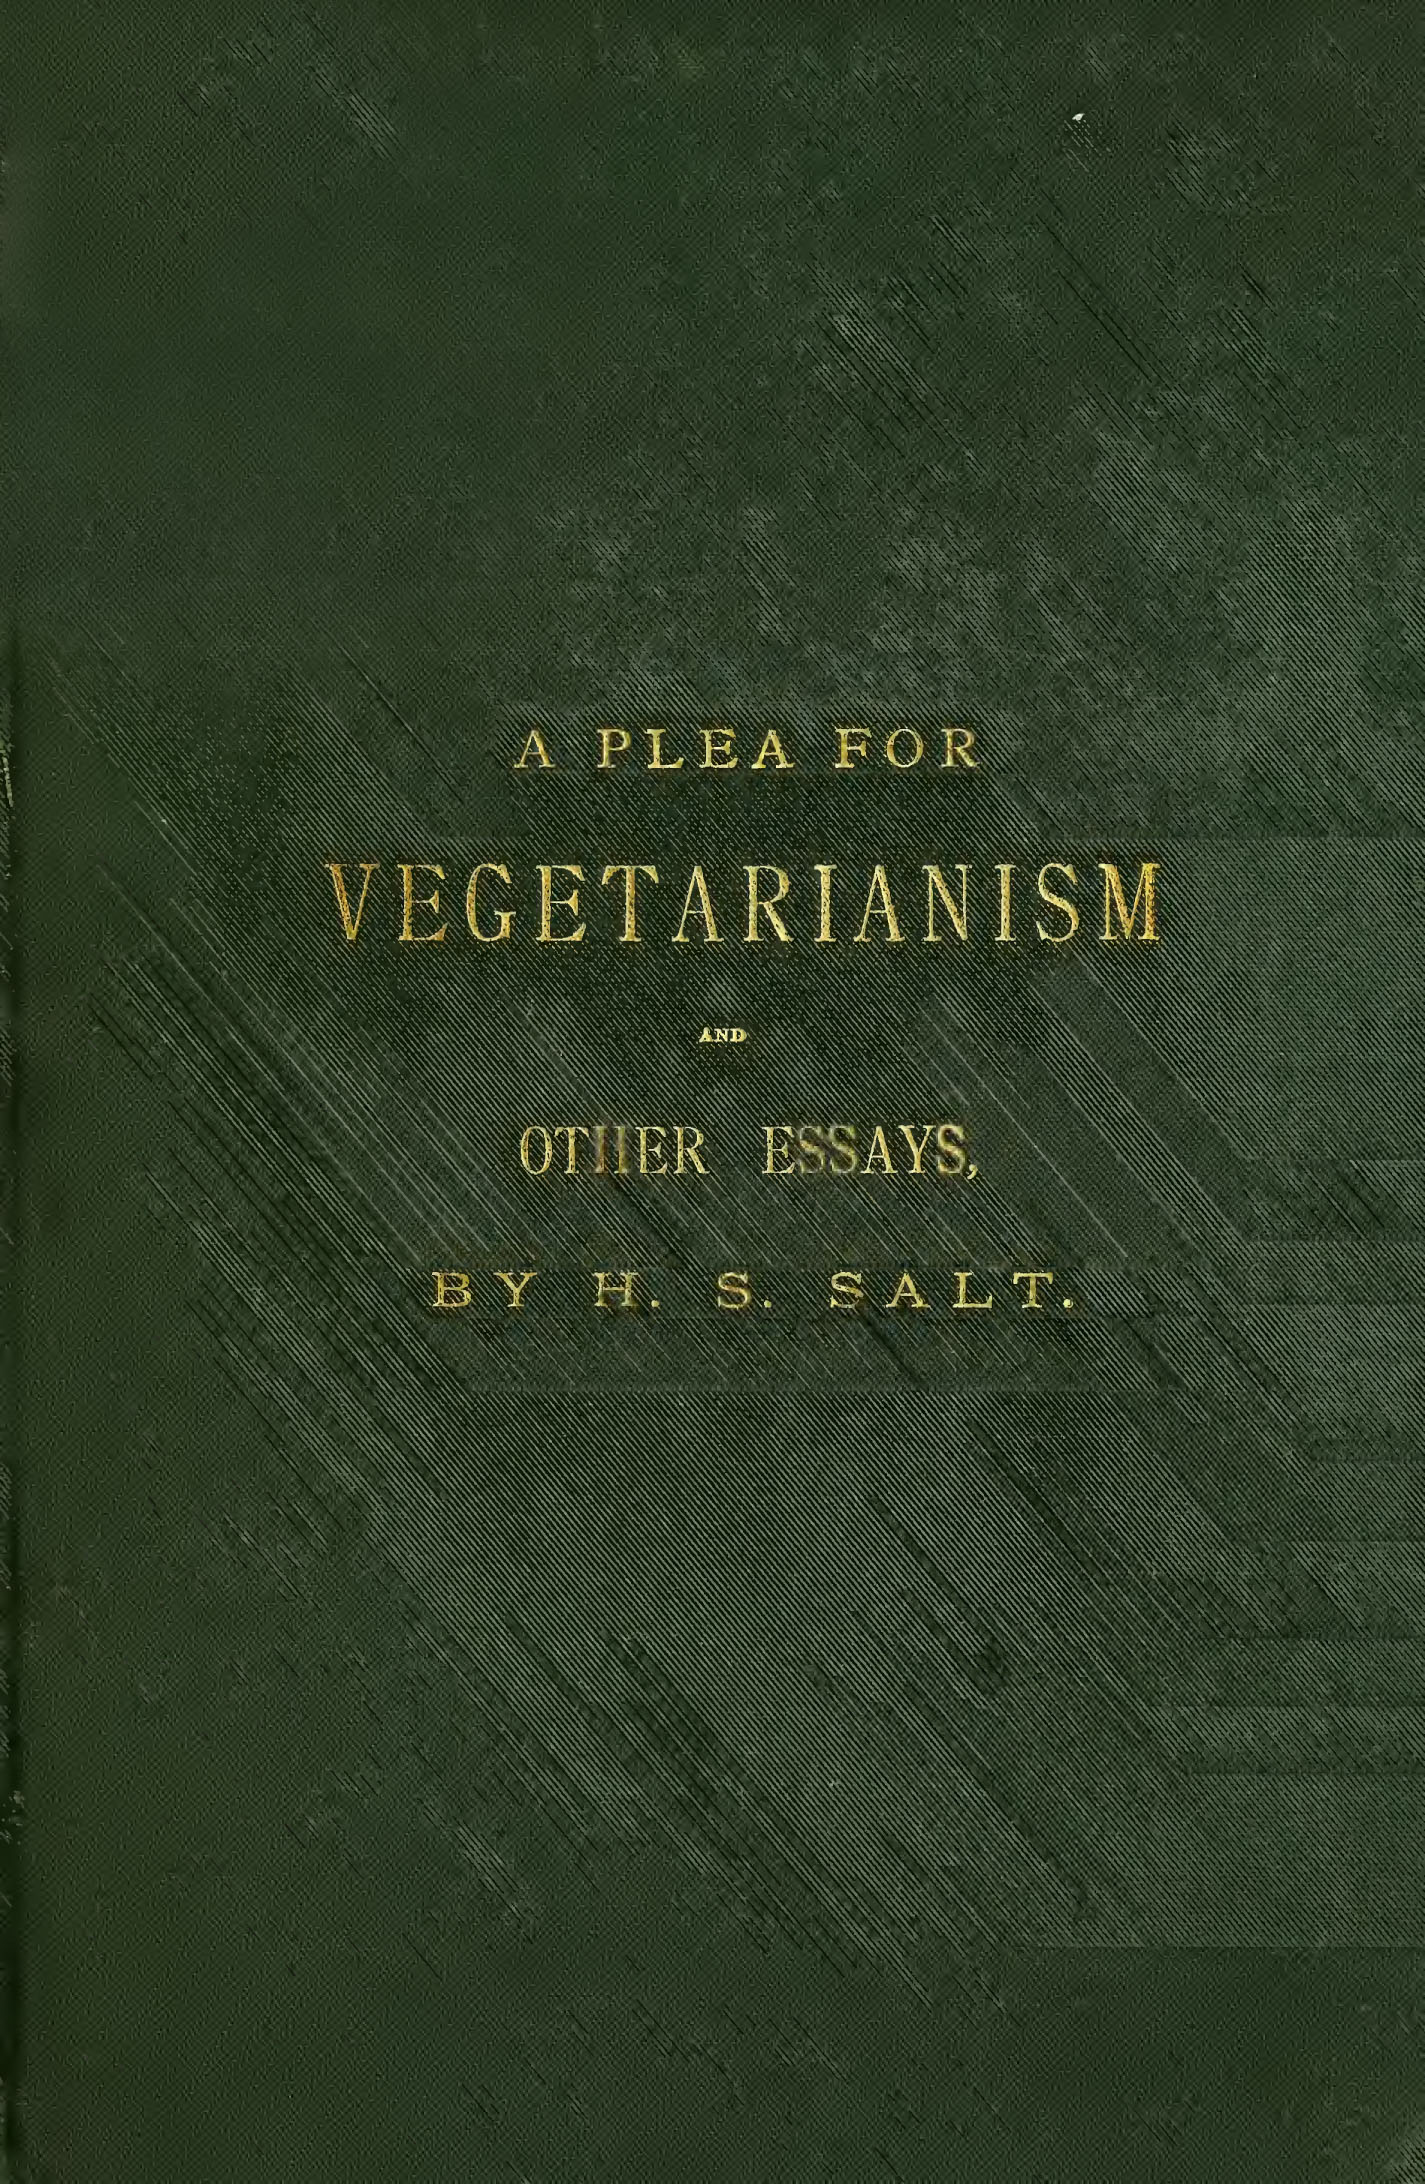 A Plea for Vegetarianism and other essays